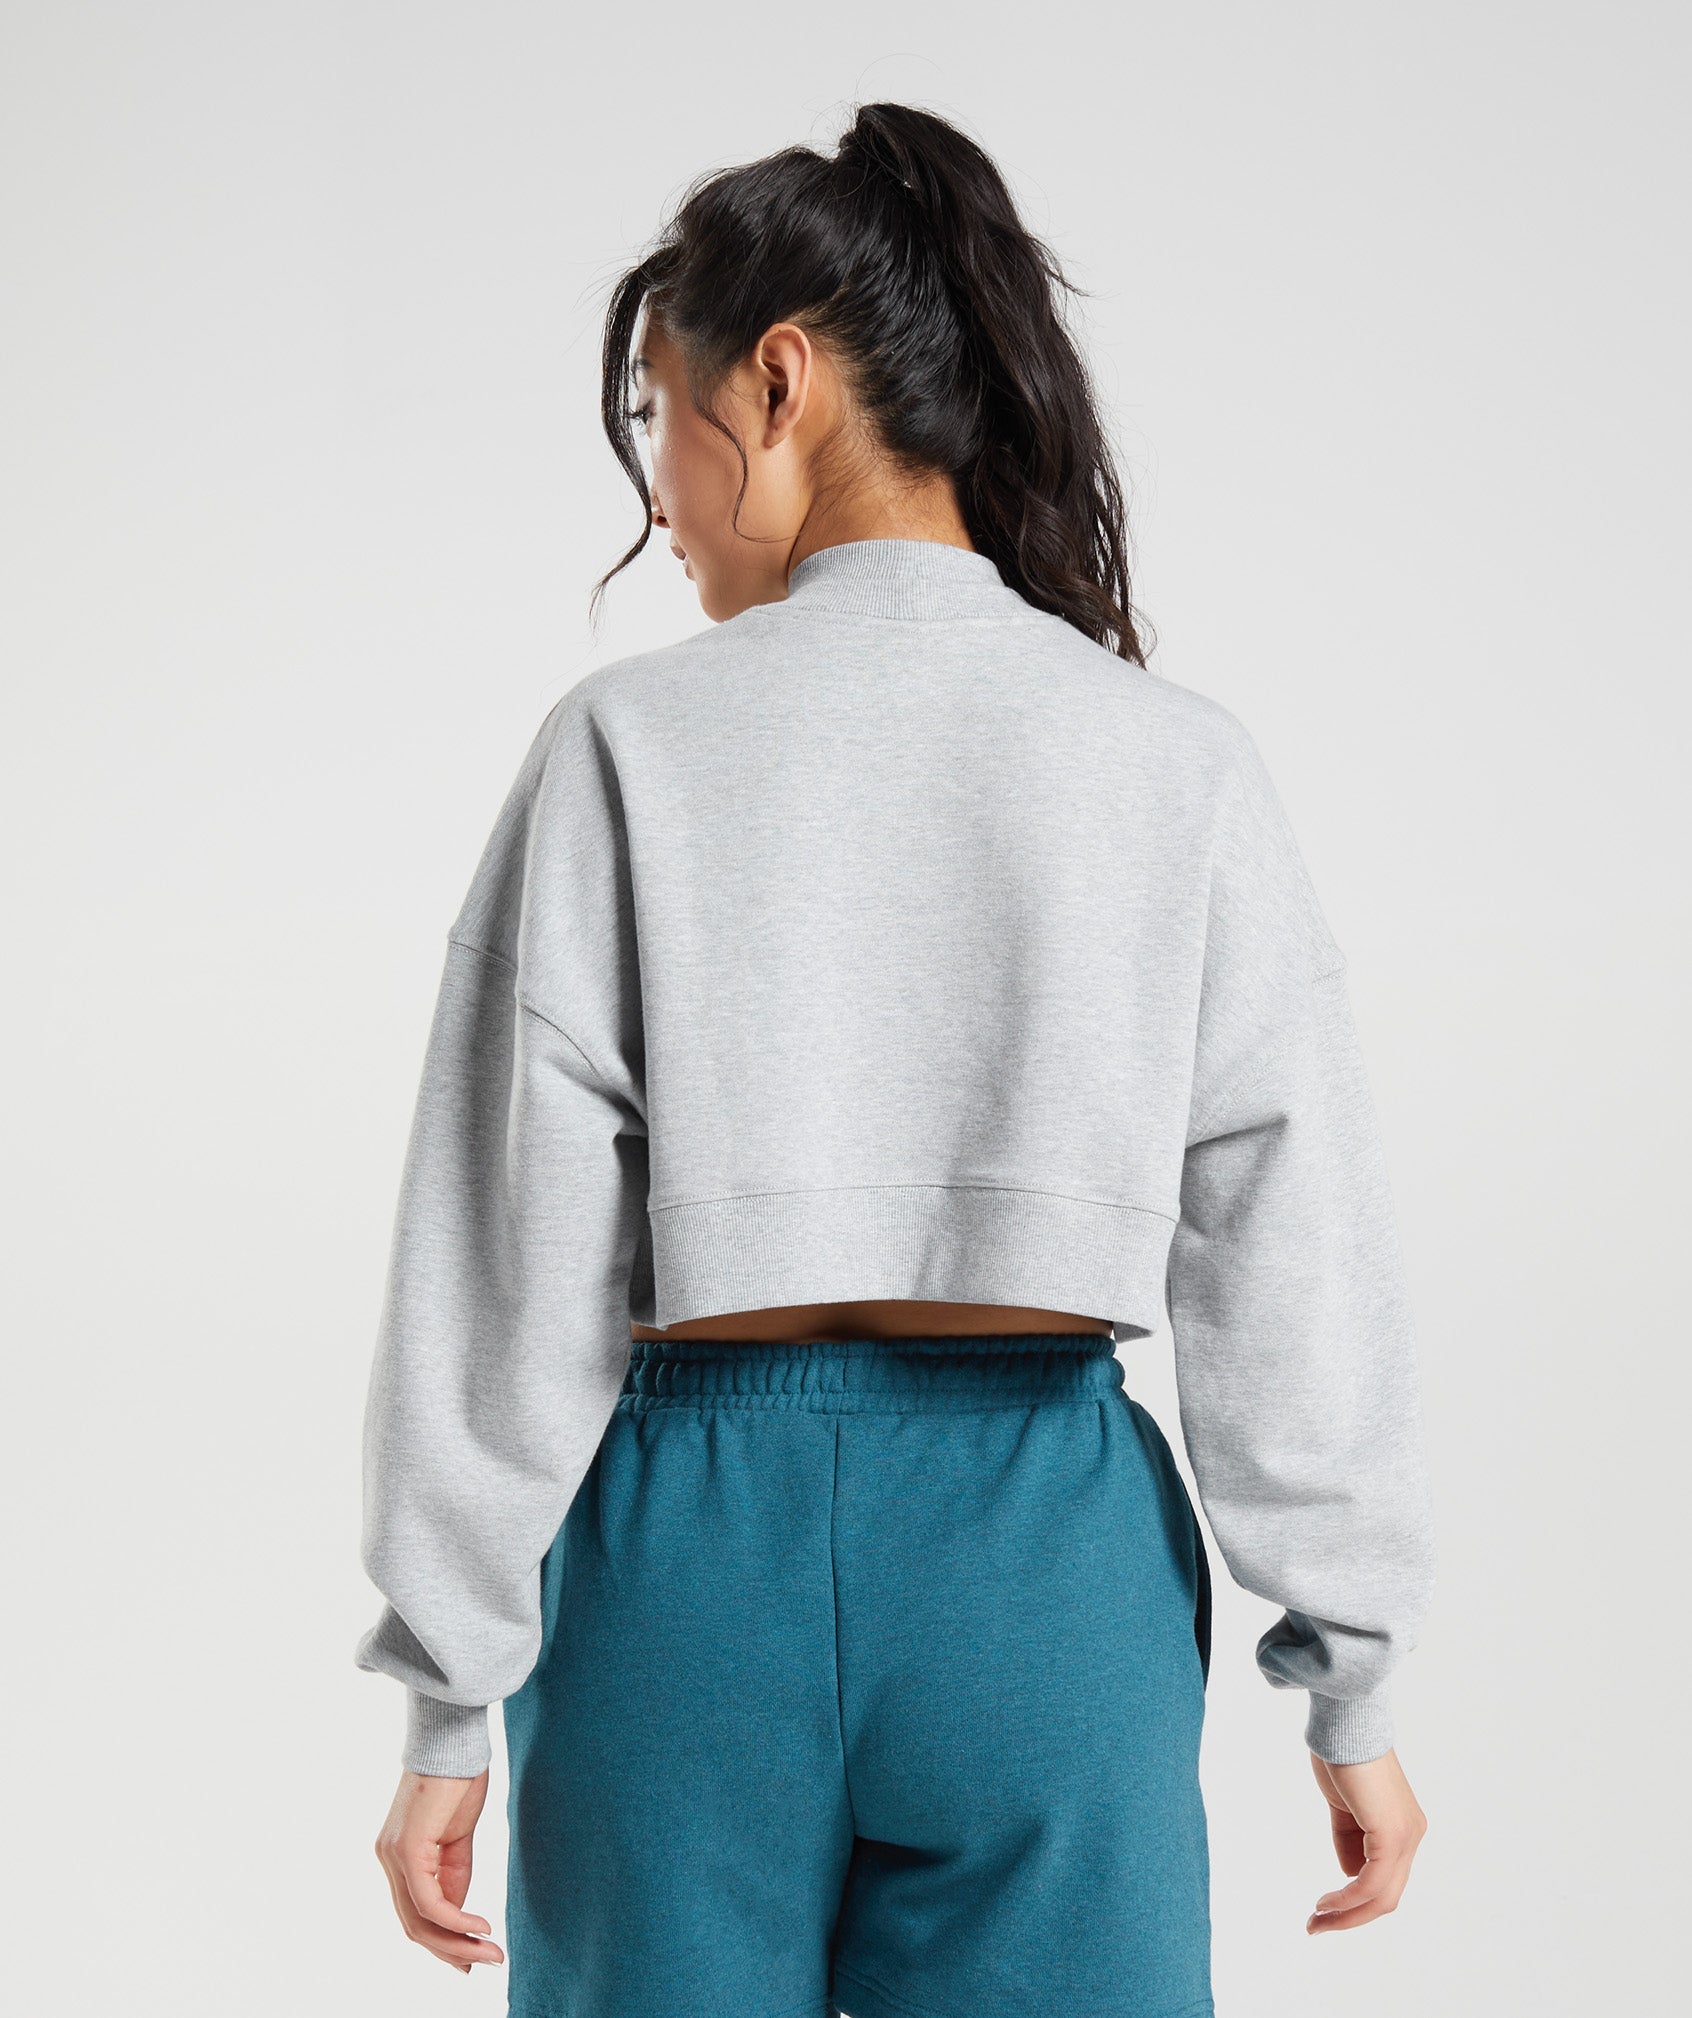 Rest Day Sweats Cropped Pullover